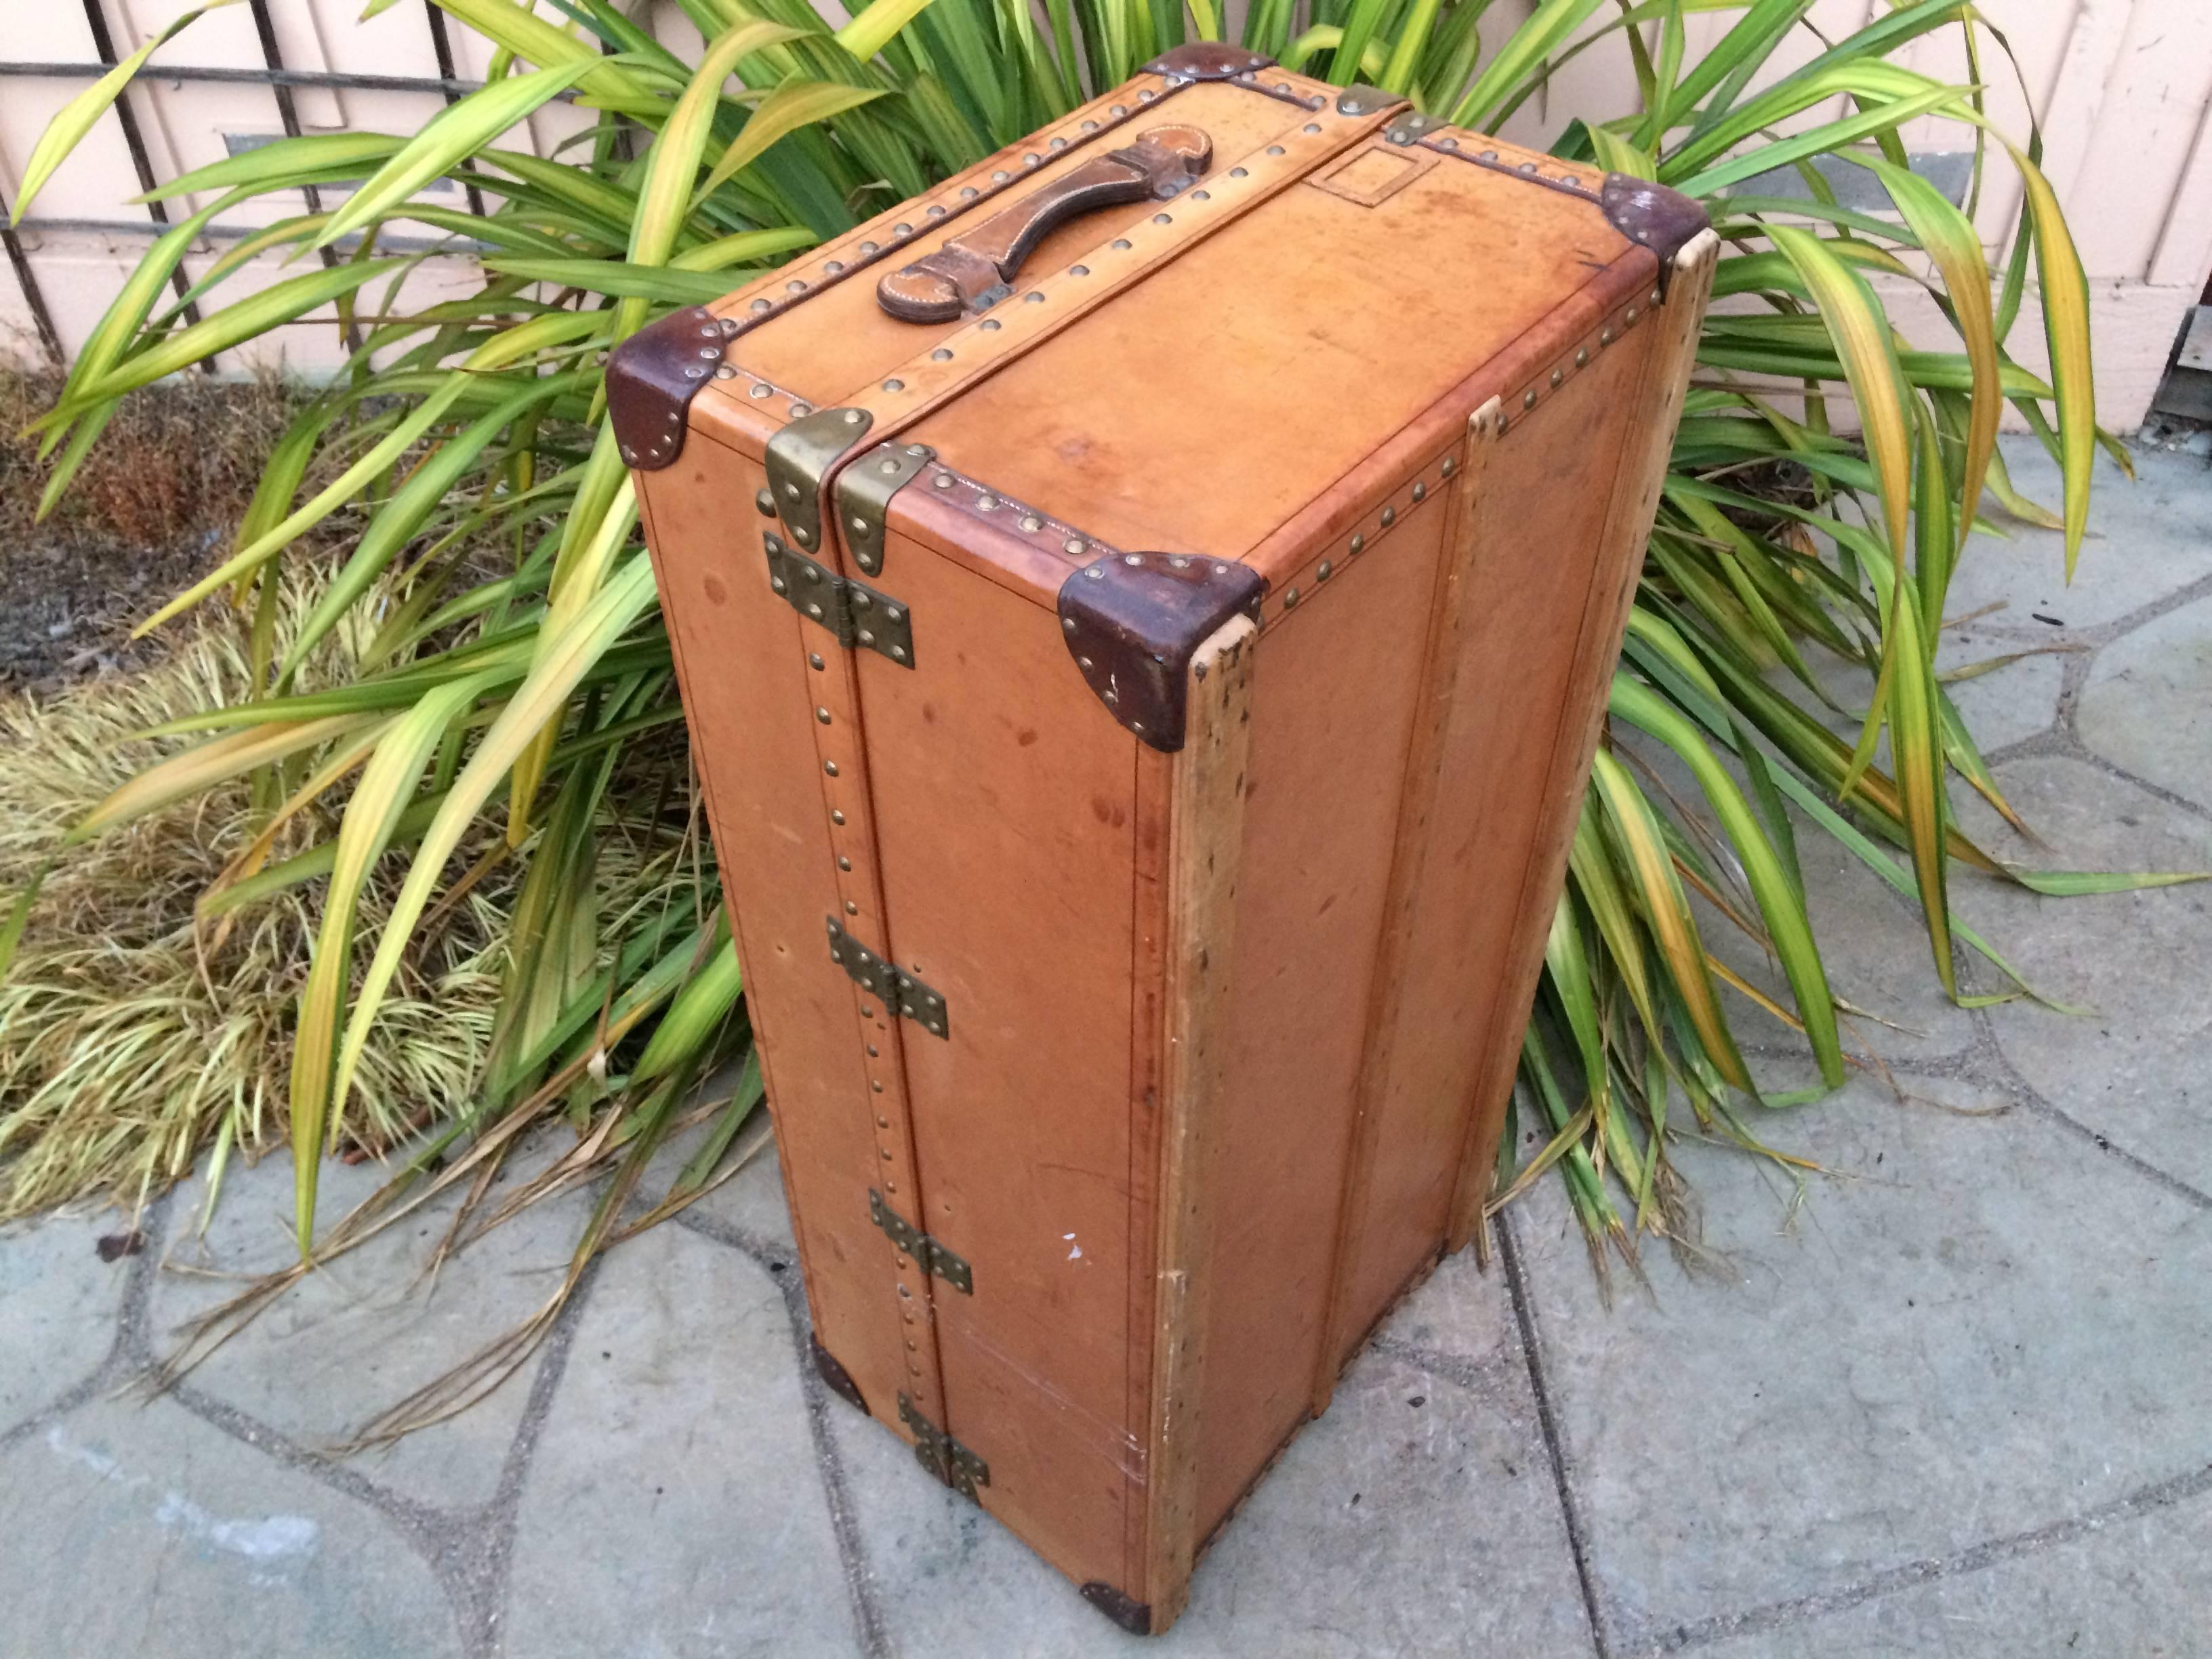 Antique Louis Vuitton Leather Steamer Wardrobe Trunk Goyard era Purse suitcase  In Excellent Condition For Sale In Carmel-by-the-sea, CA